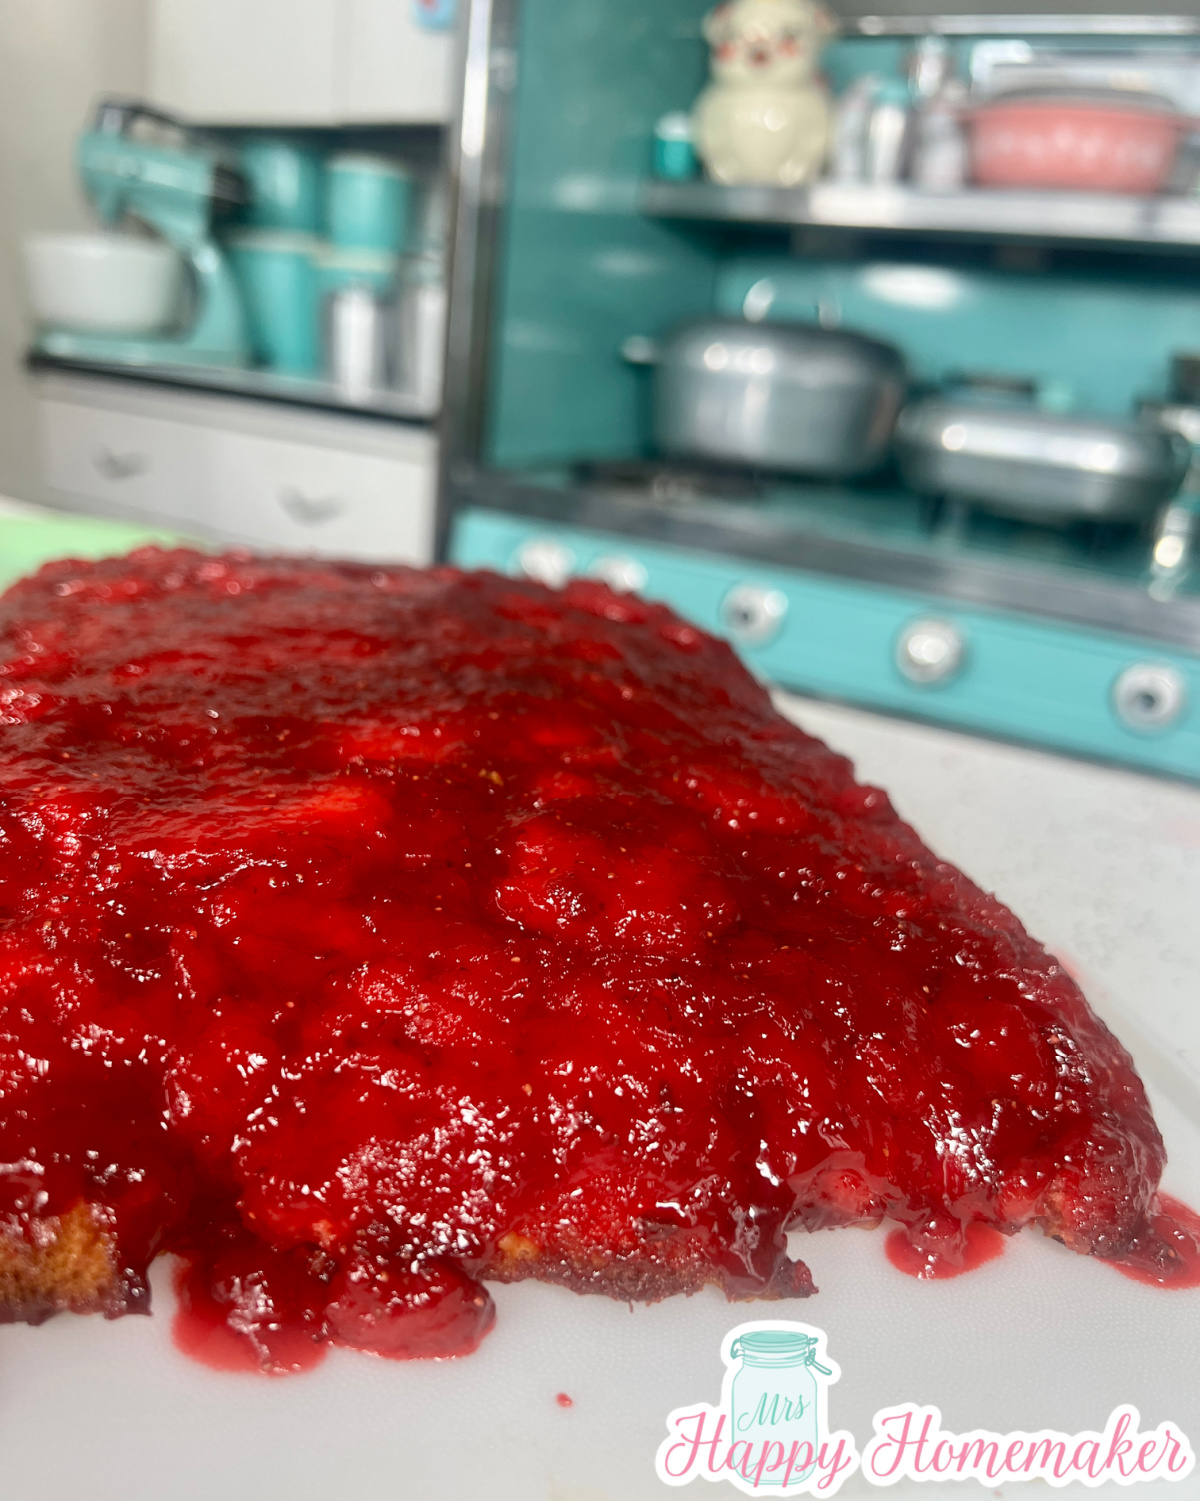 Strawberry Upside Down cake with a blue stove in the background